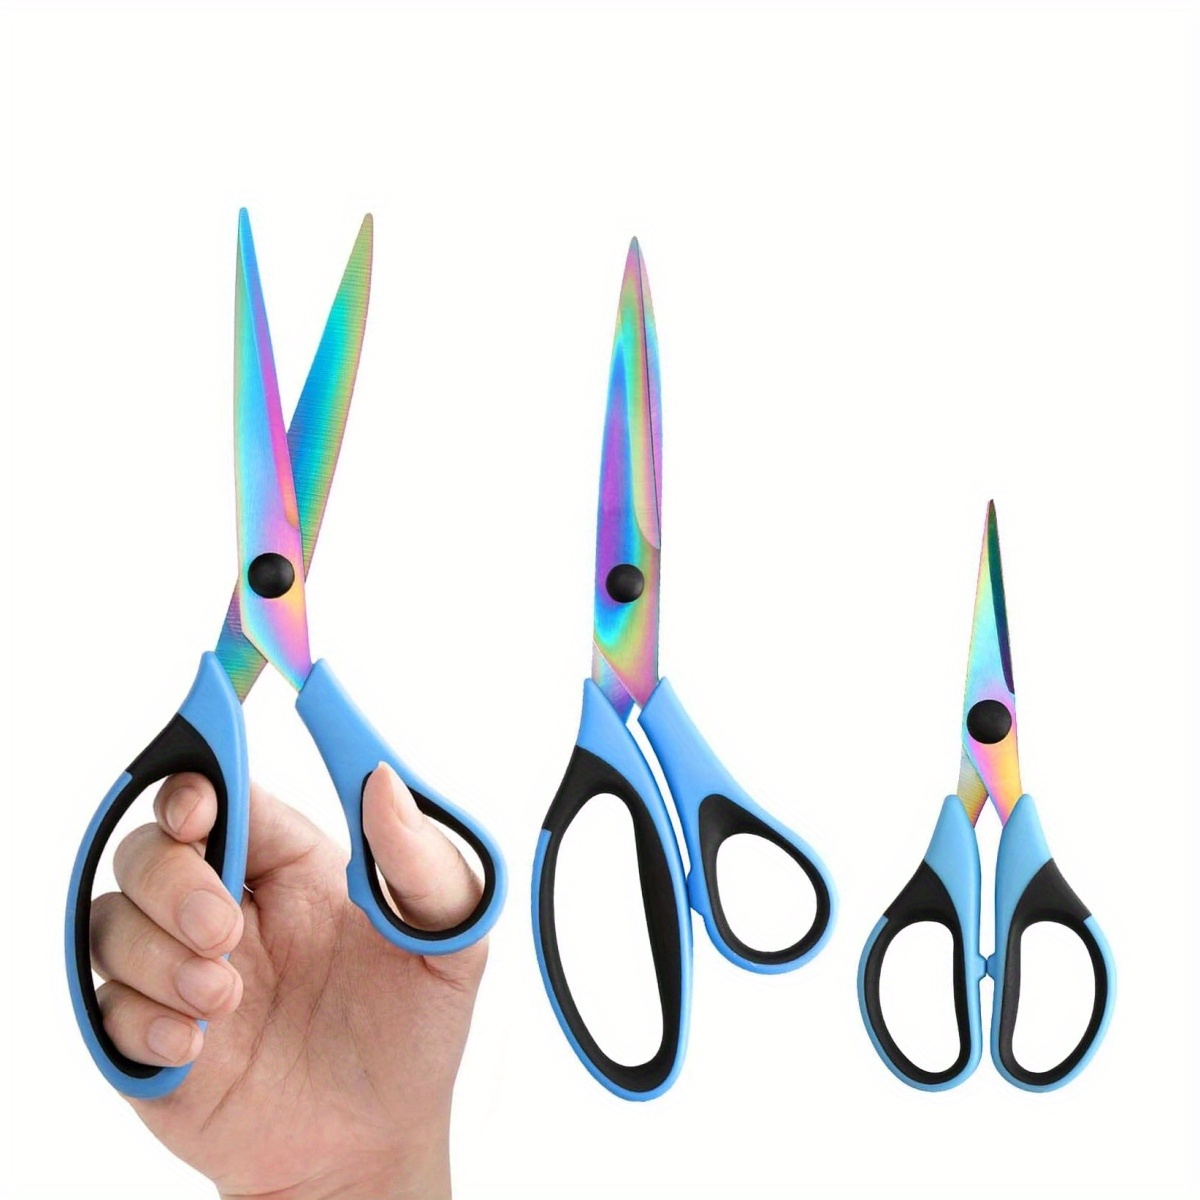 3 pcs Pack Stainless Steel Comfort Grip Office Scissor Sewing